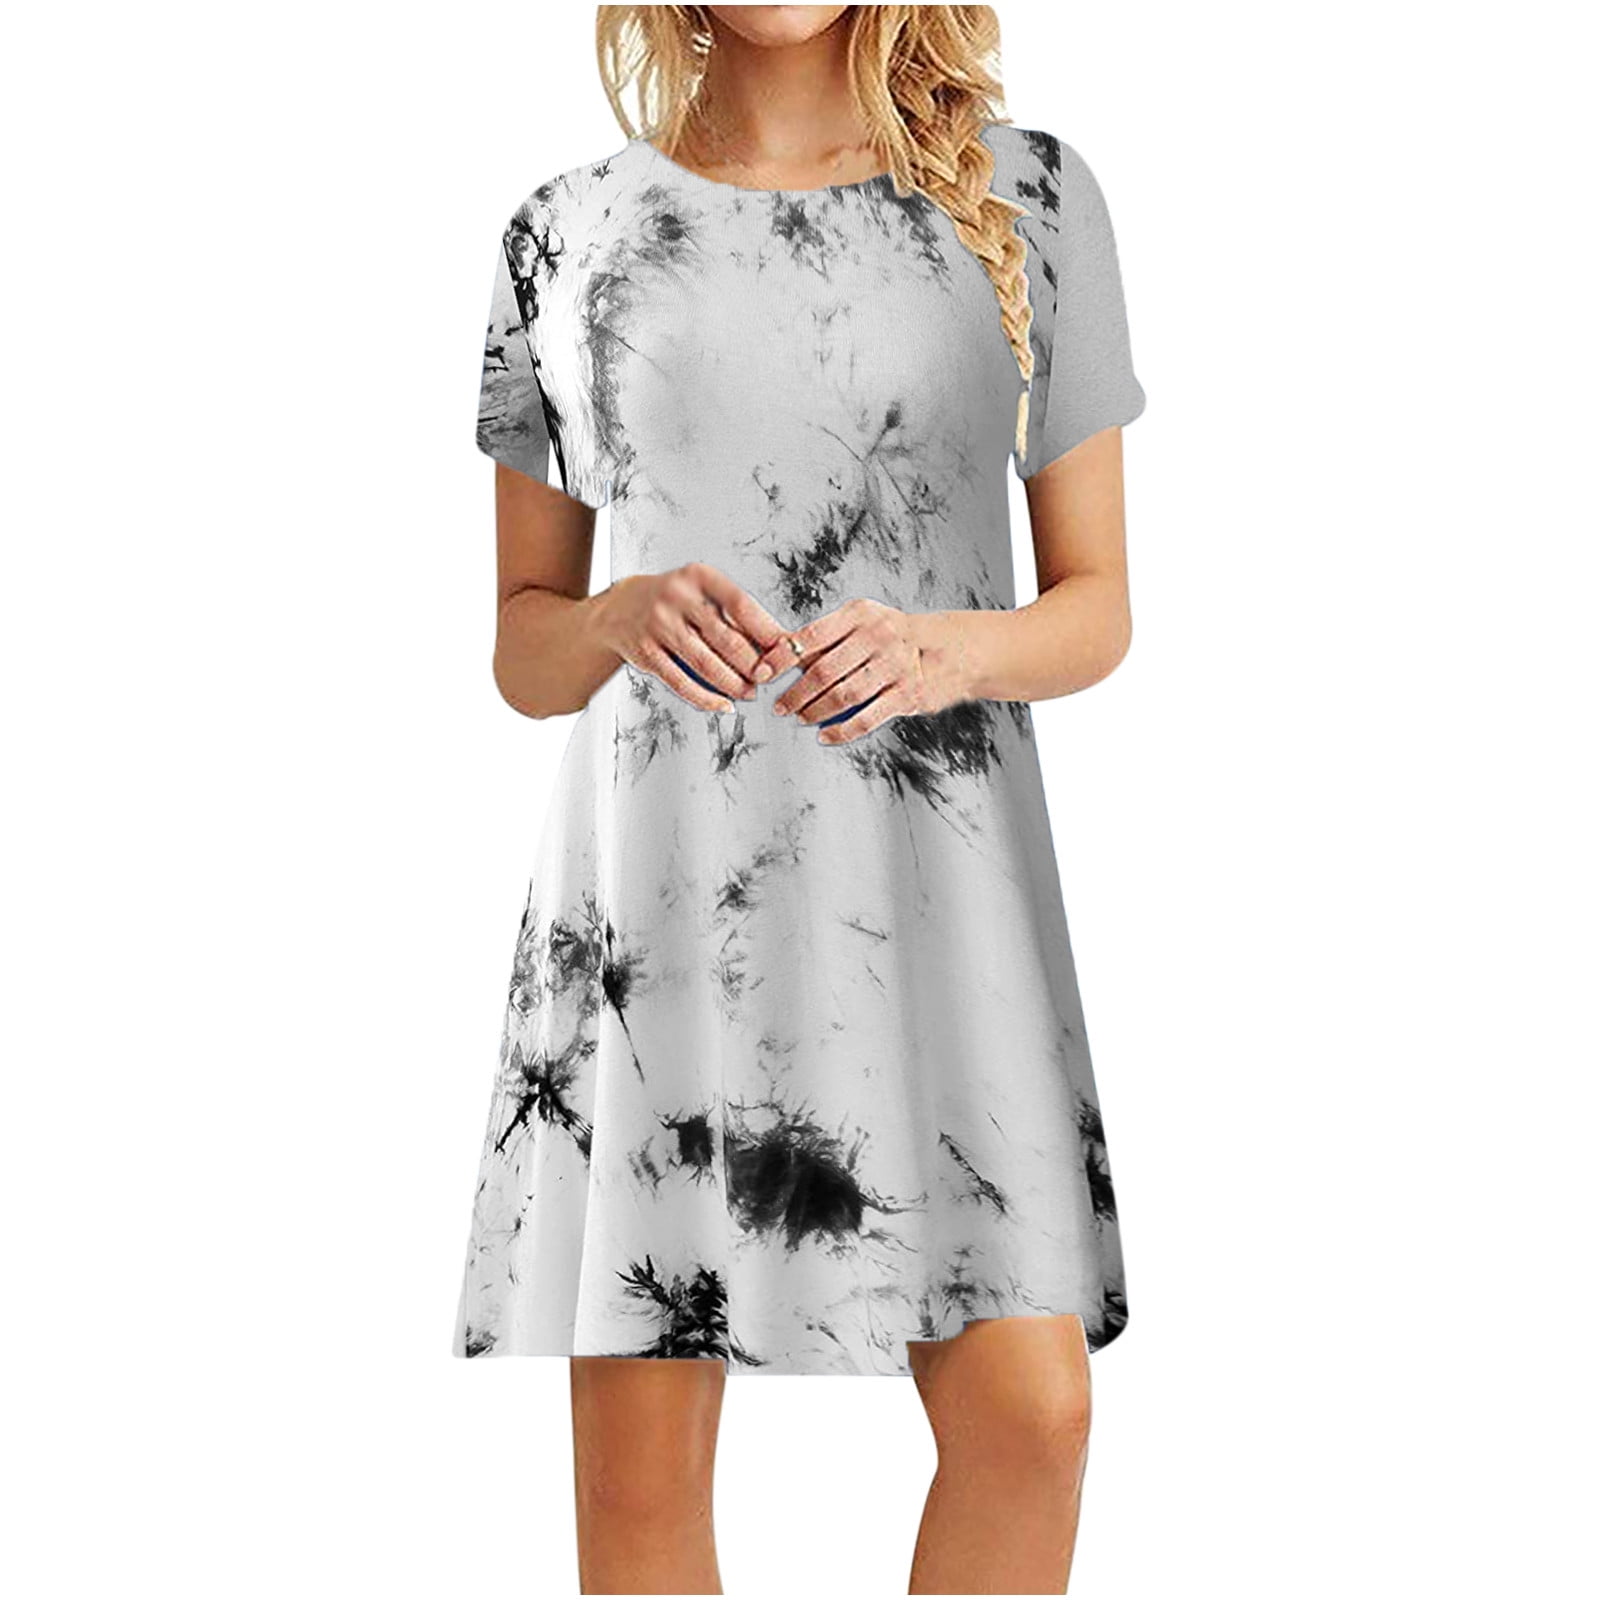 Mchoice maxi dresses for women summer Casual Short Sleeve O-Neck ...